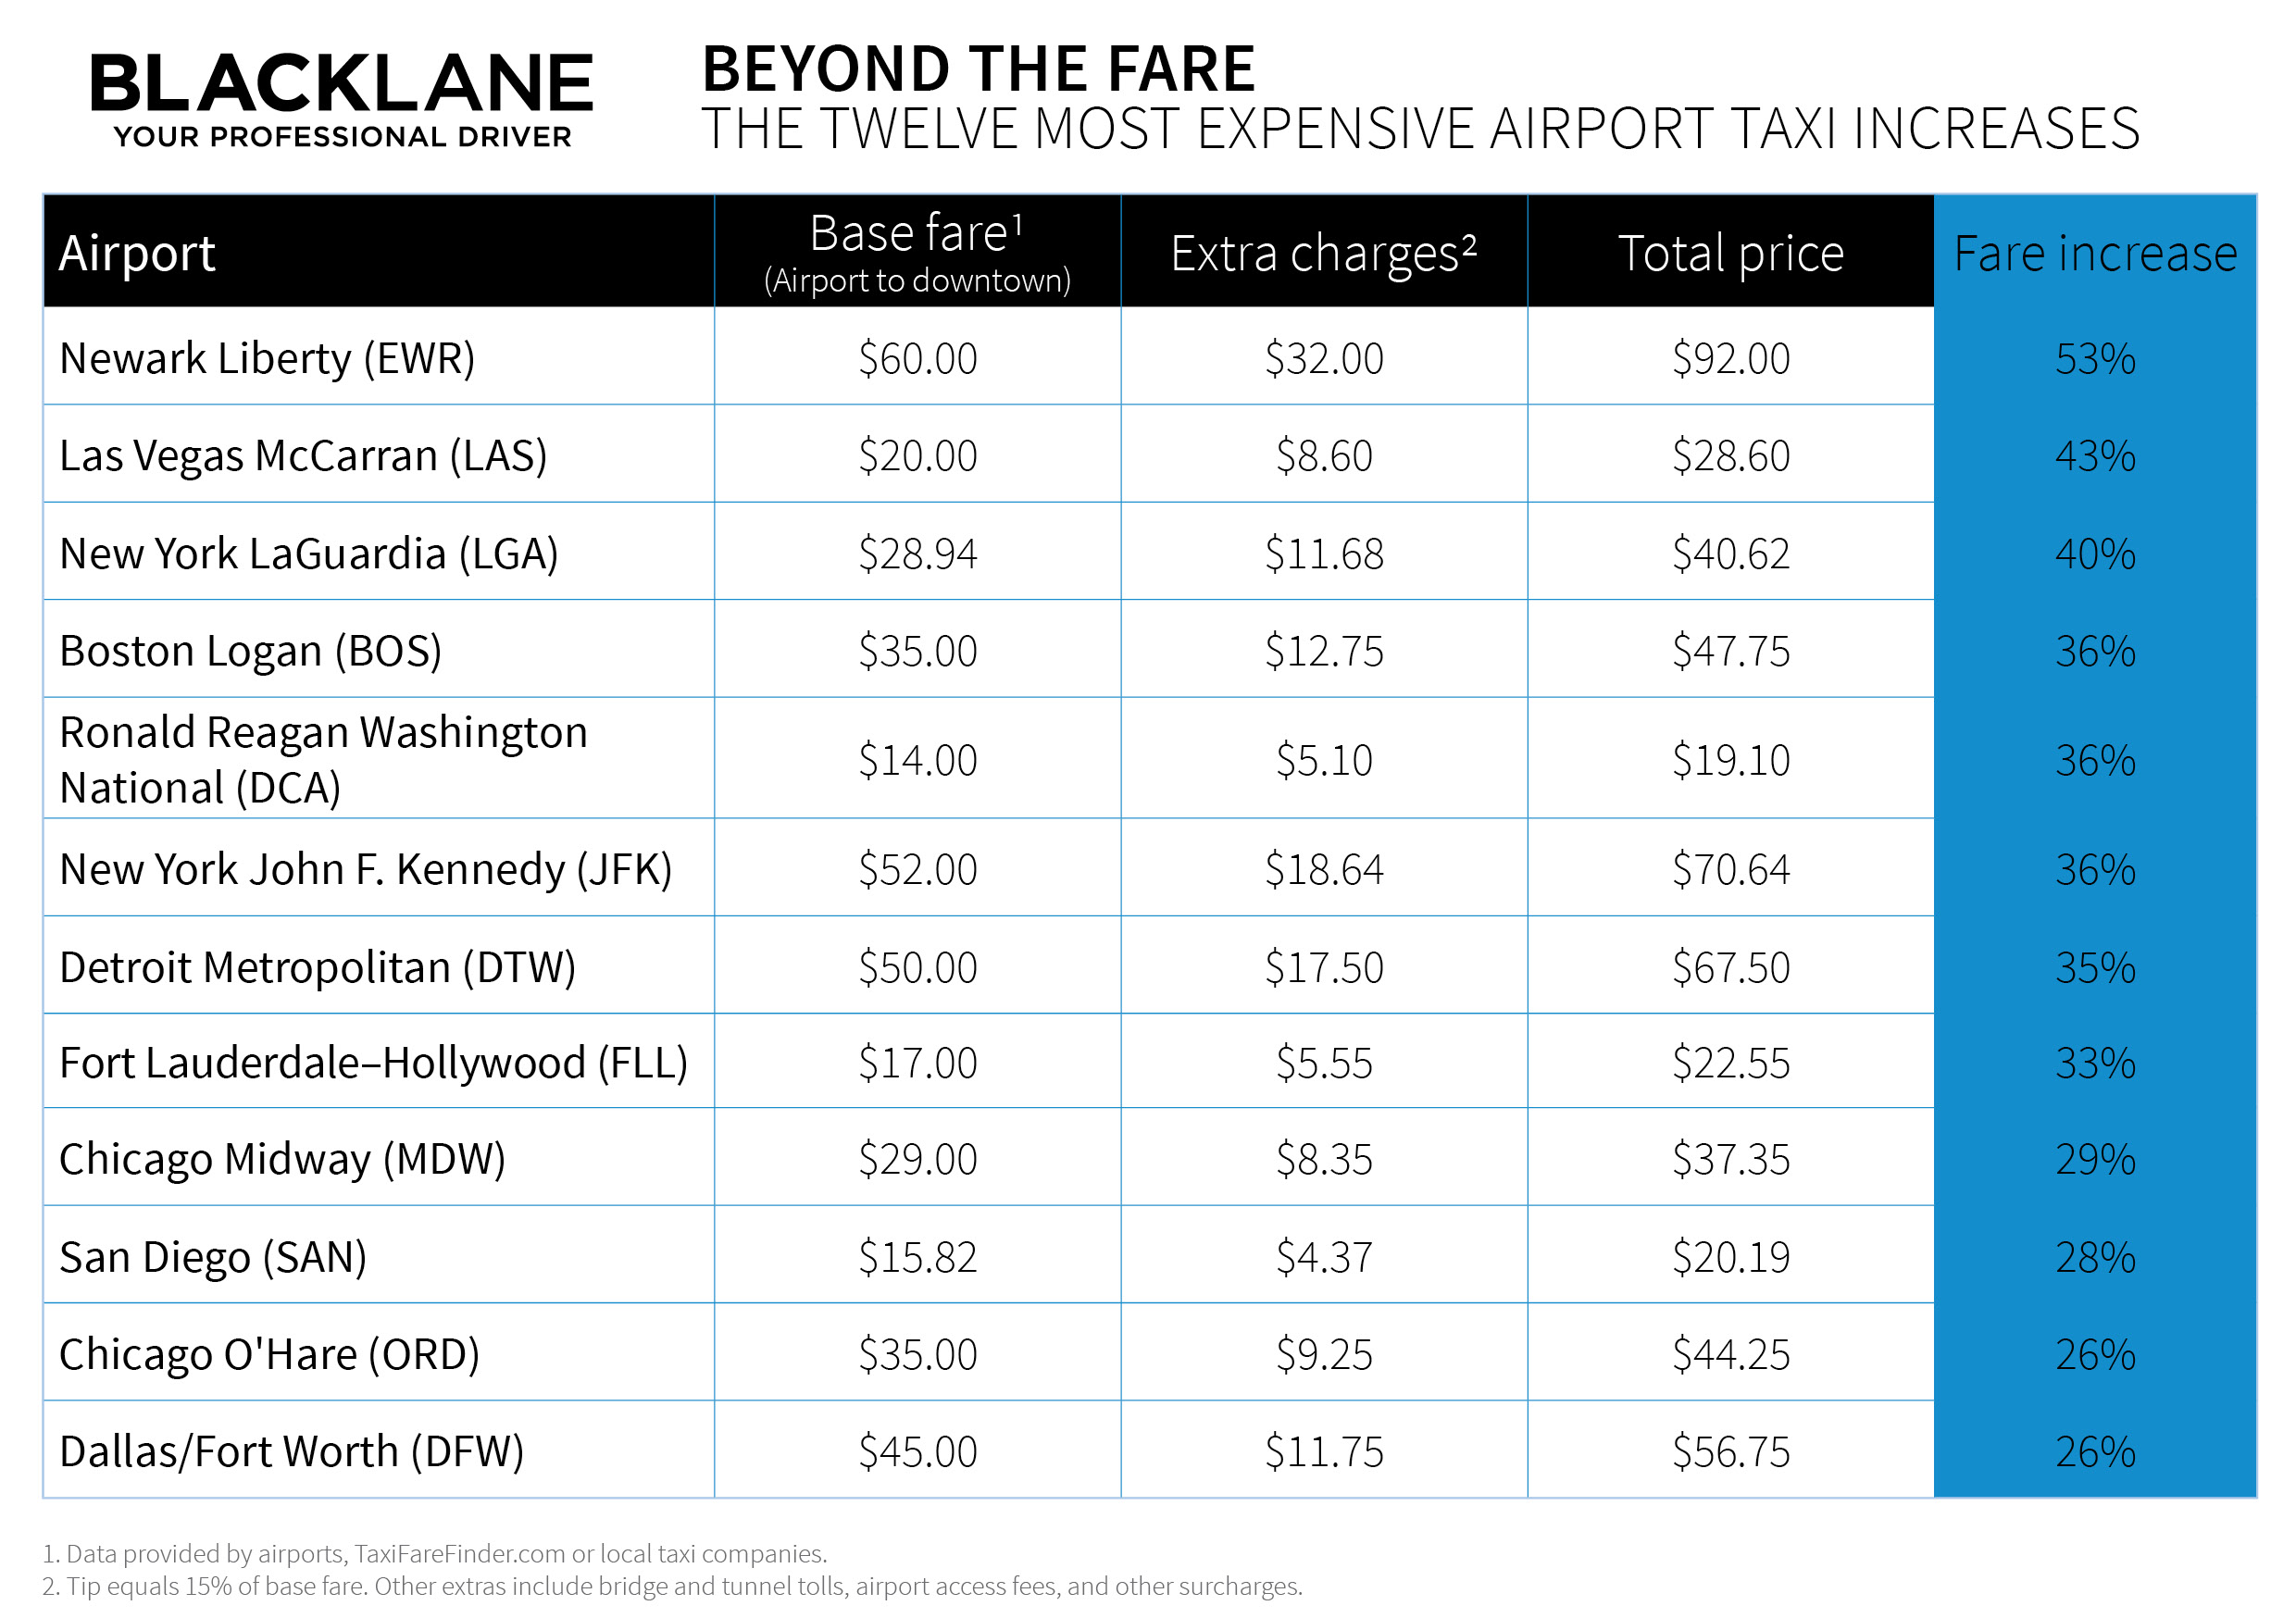 U.S. Airport Taxi Increases